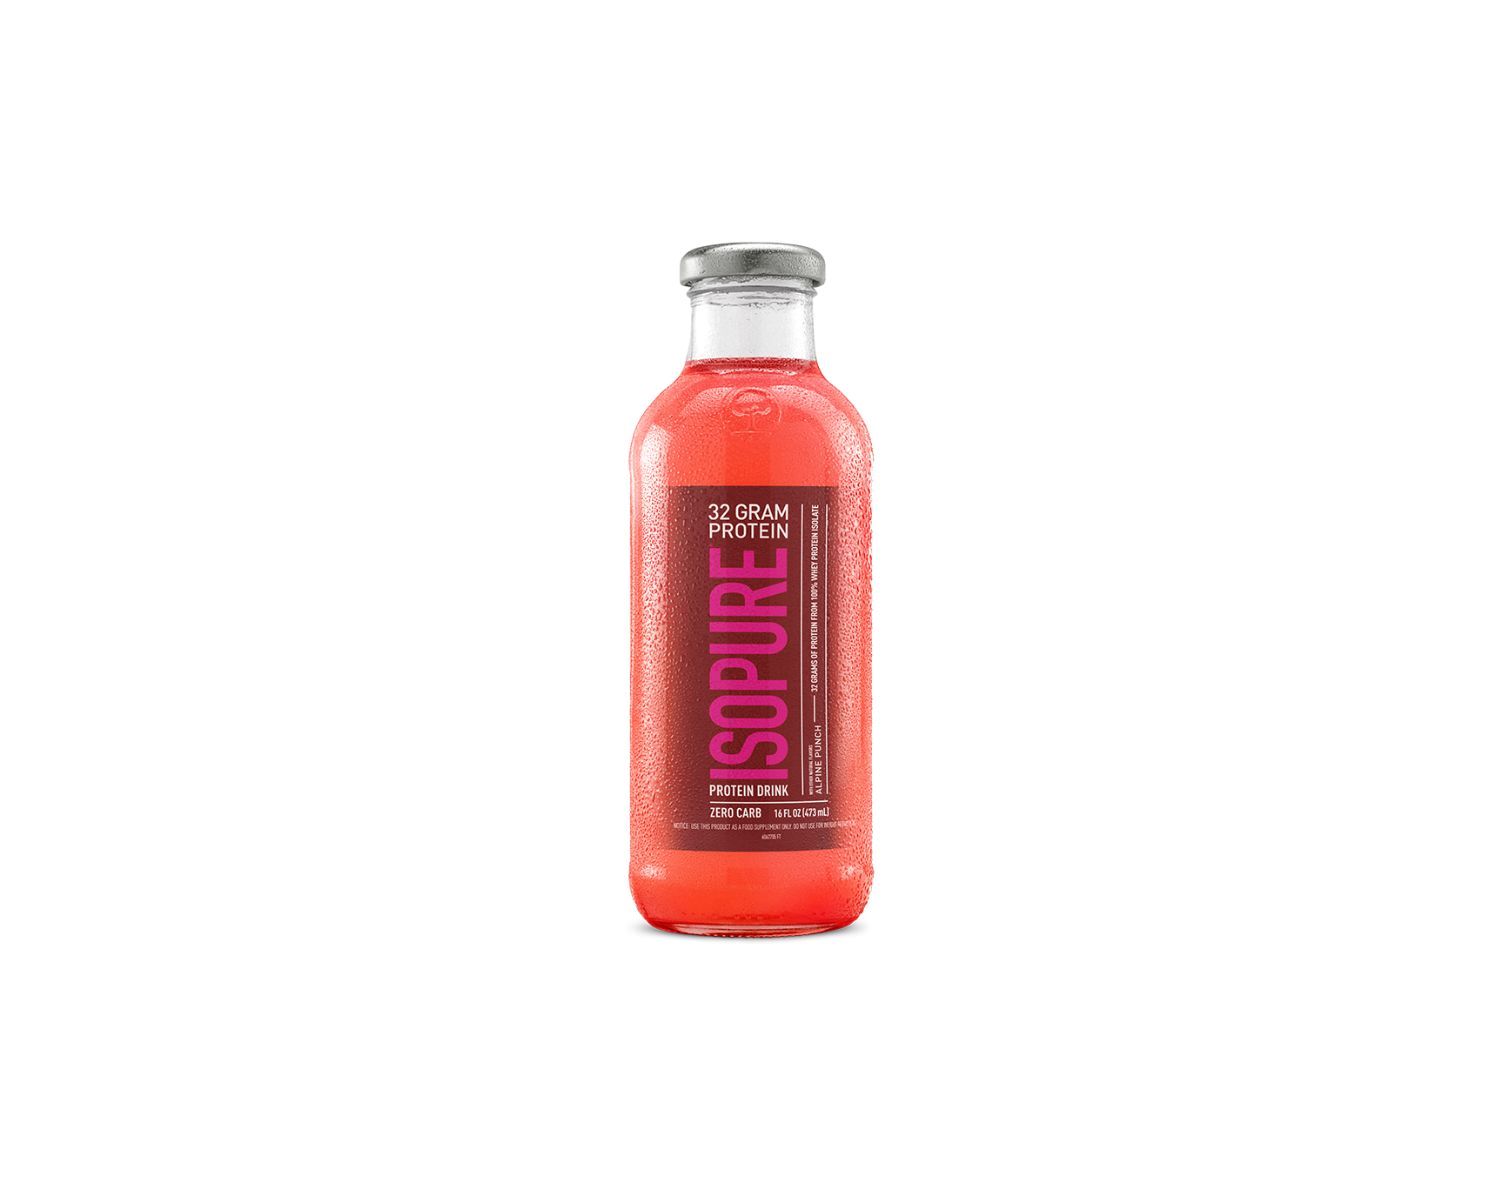 19-isopure-protein-drink-nutrition-facts